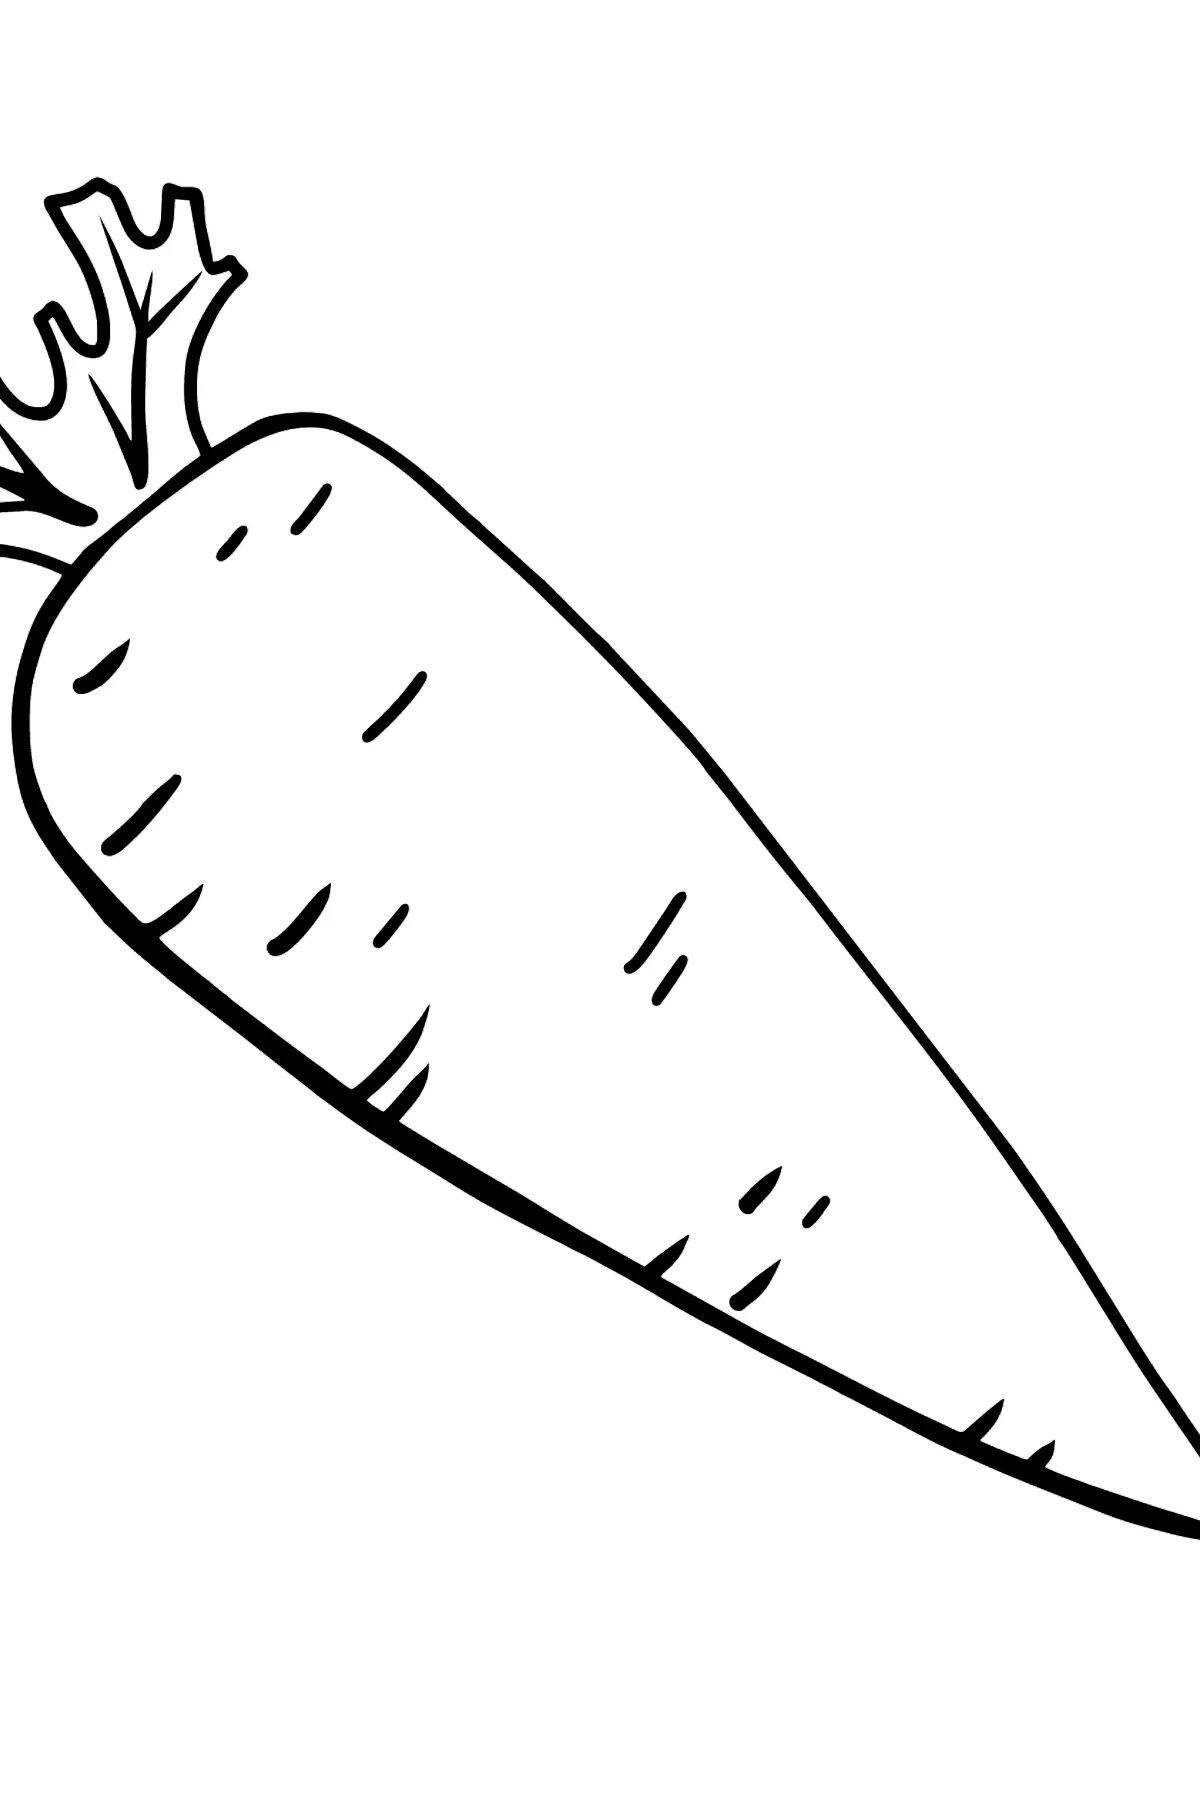 Carrot drawing for kids #6